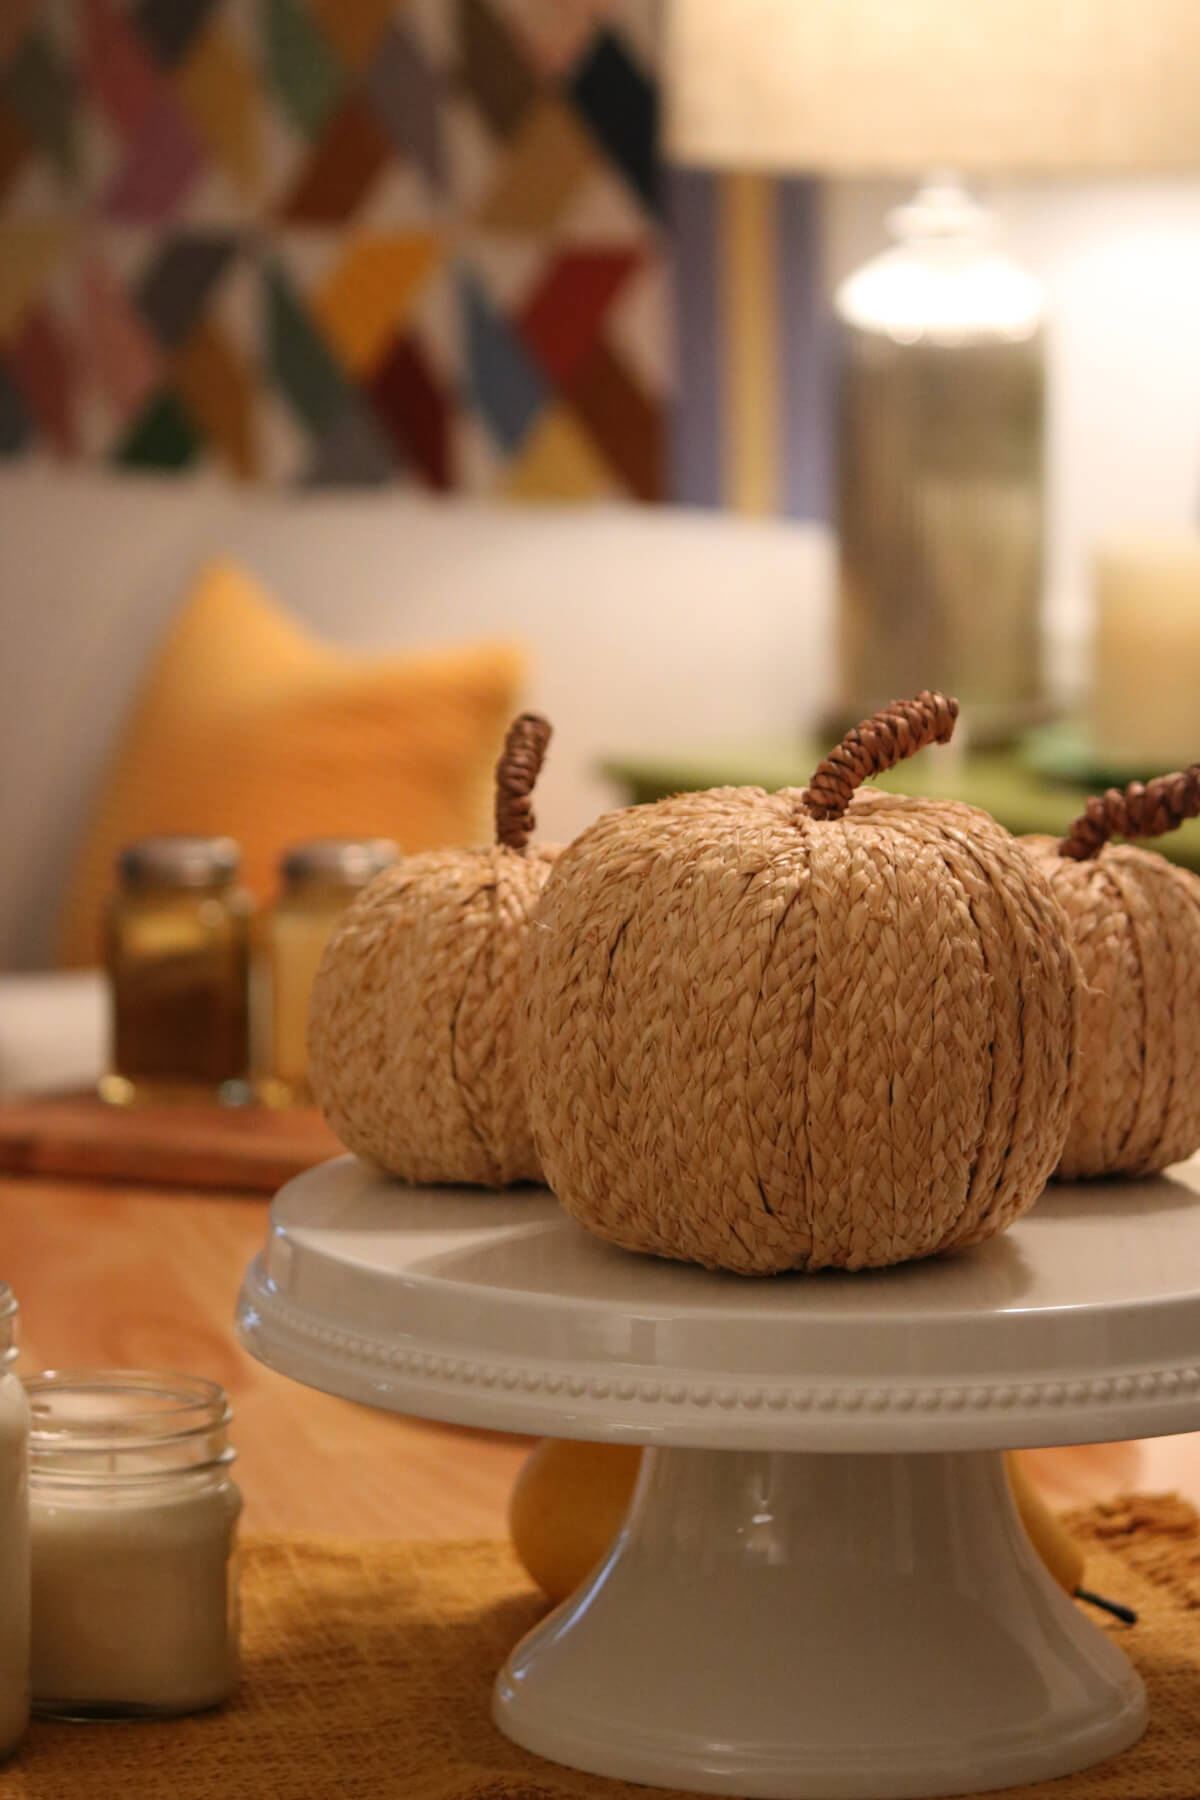 In Cozy Minimalist Fall Decorating, textured pumpkins on a cake plate